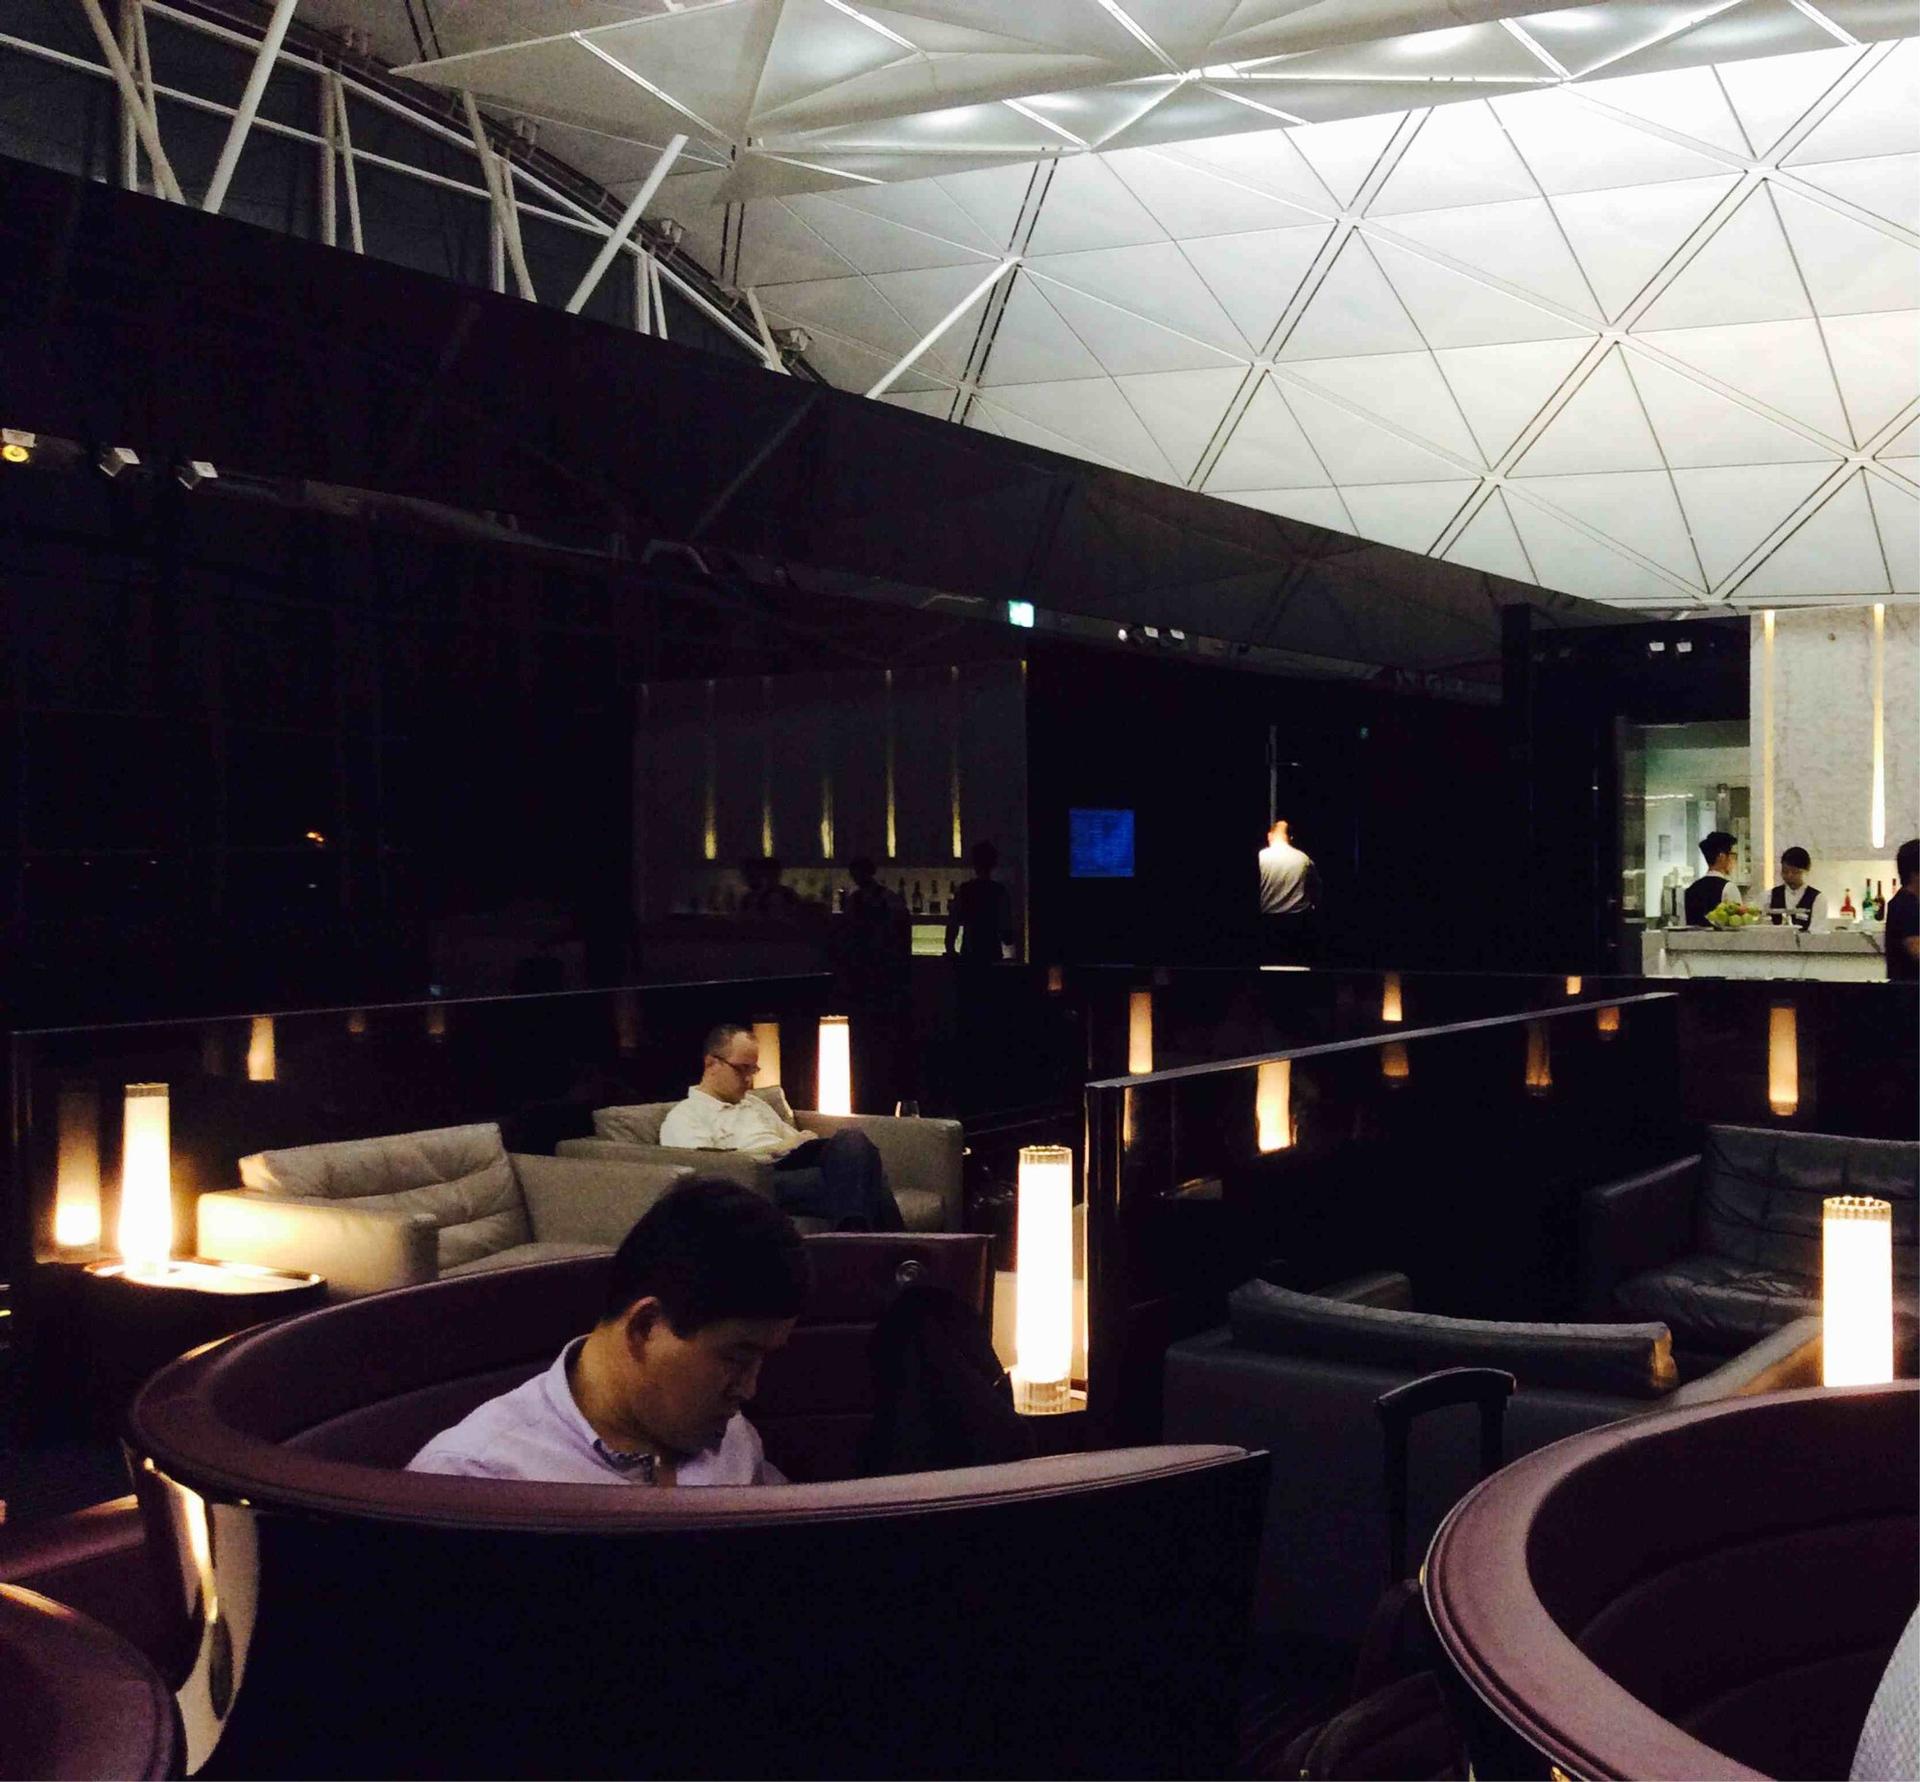 Cathay Pacific The Wing First Class Lounge image 68 of 89